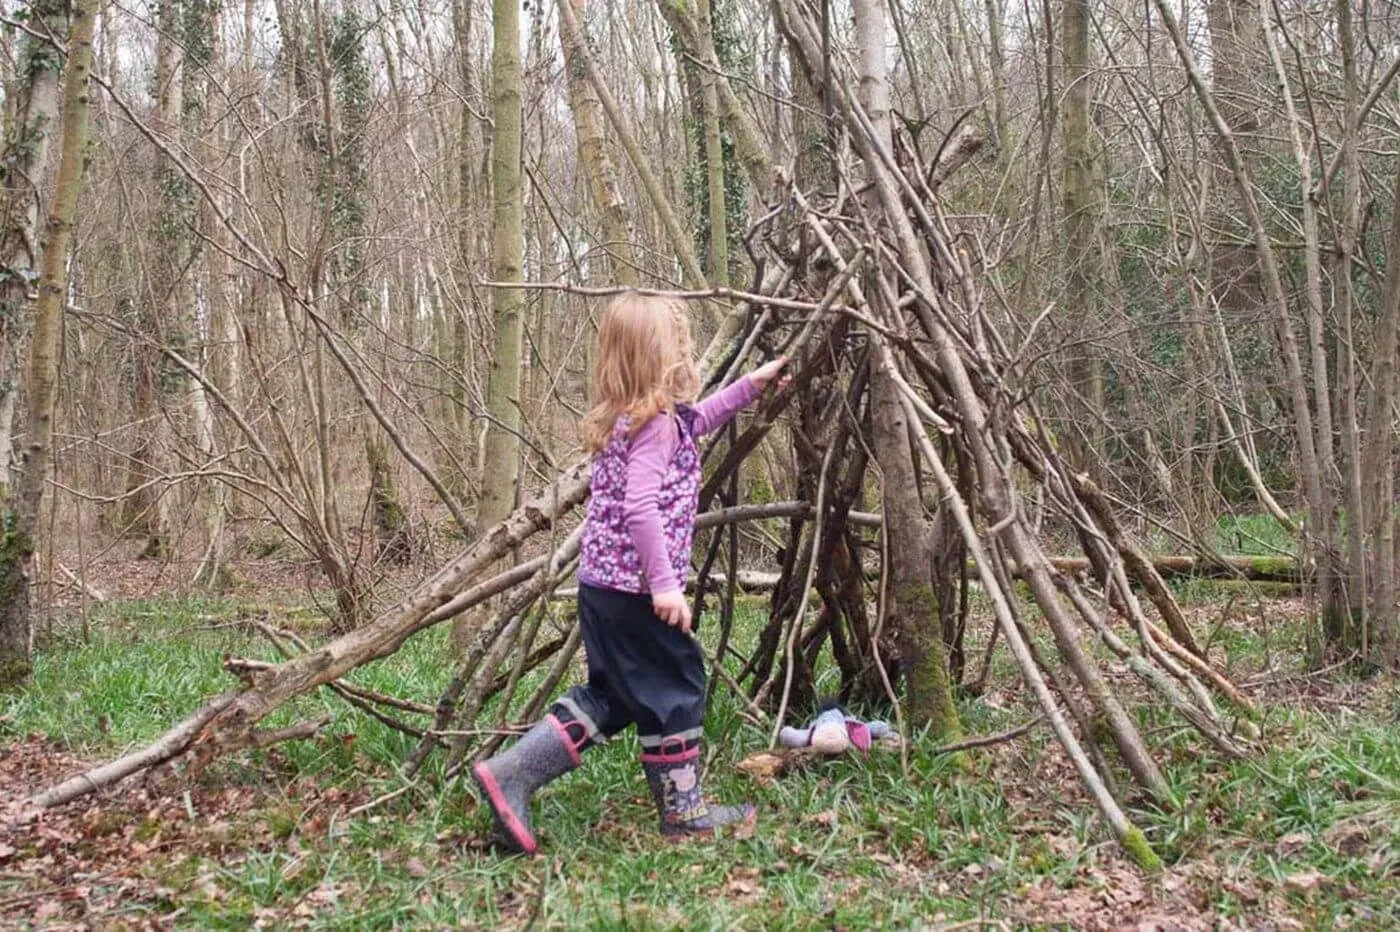 A young girl building a den out of sticks in woodland at Ashdown Forest.